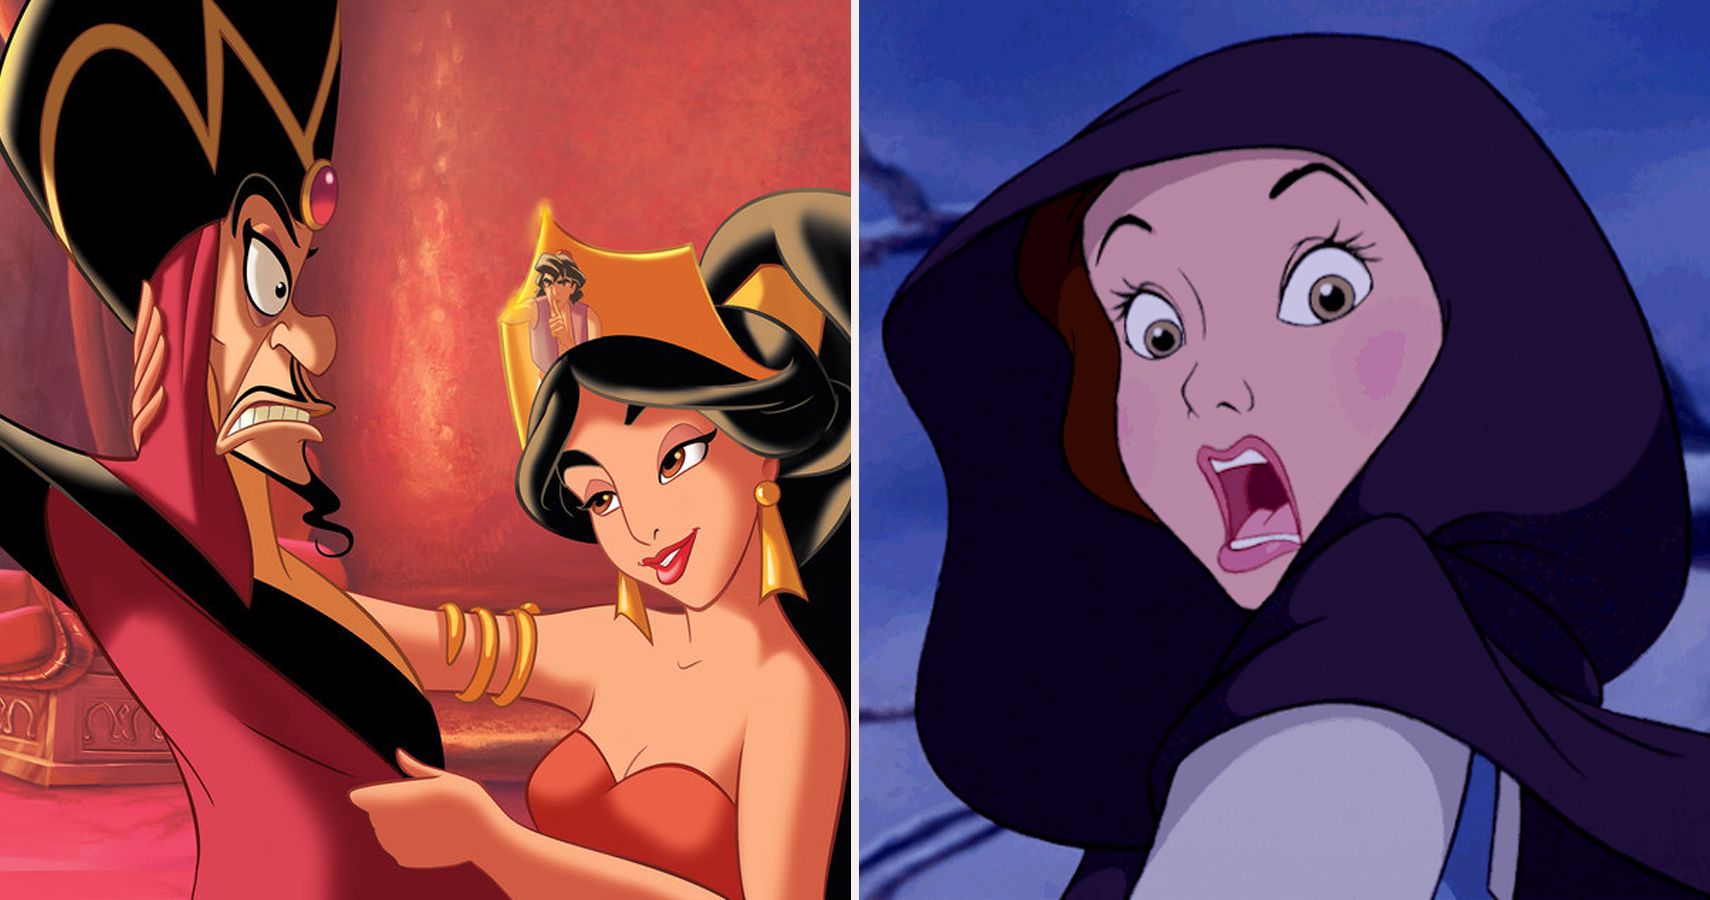 Hidden Messages In Disney Movies That Went Over Our Heads